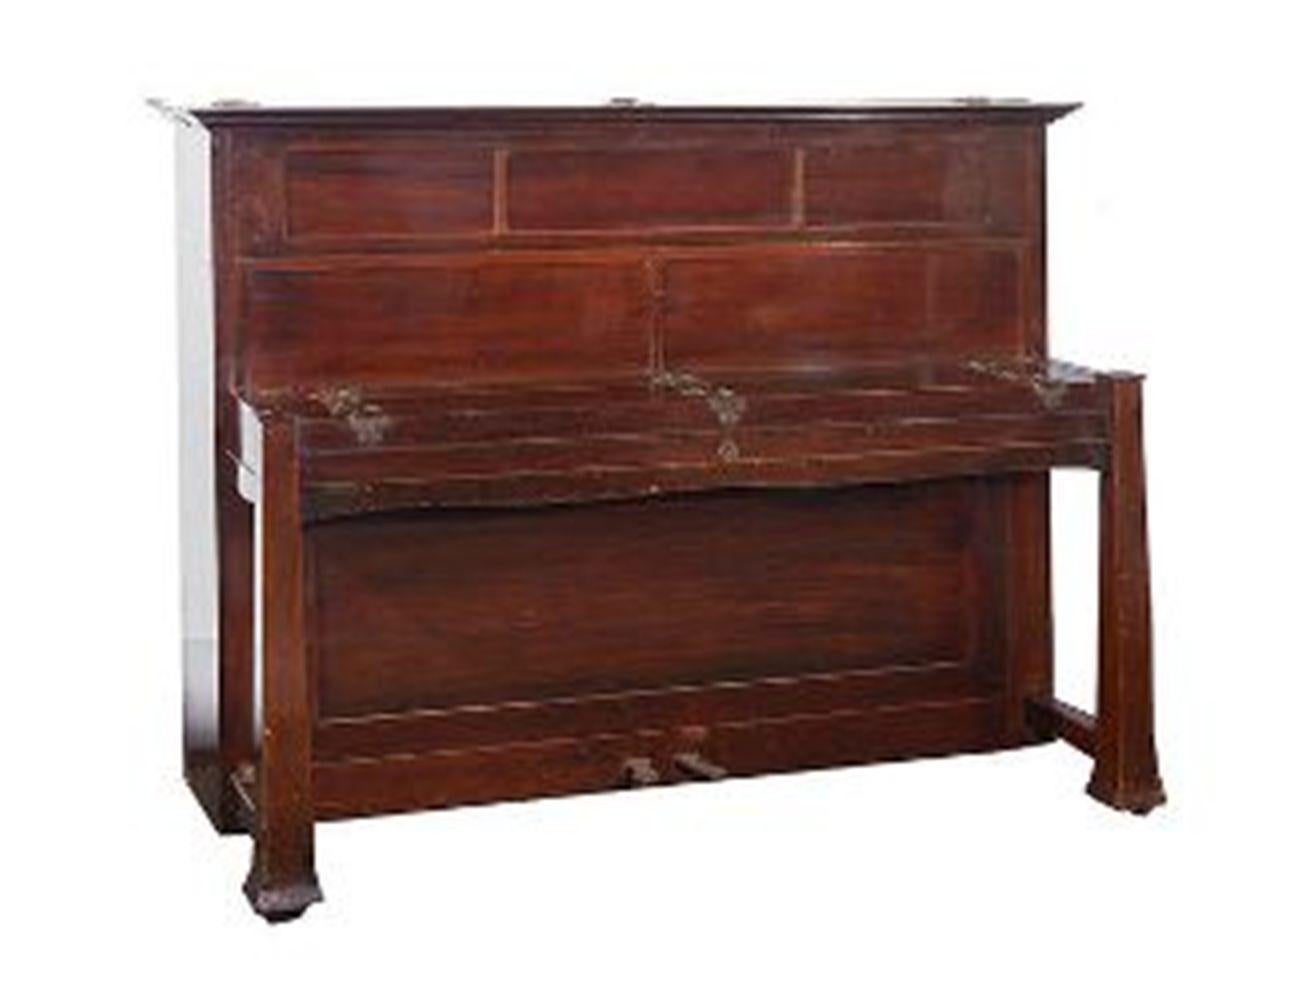 Mahogany Early 20th Century Upright Piano Manufactured by C. Bechstein For Sale